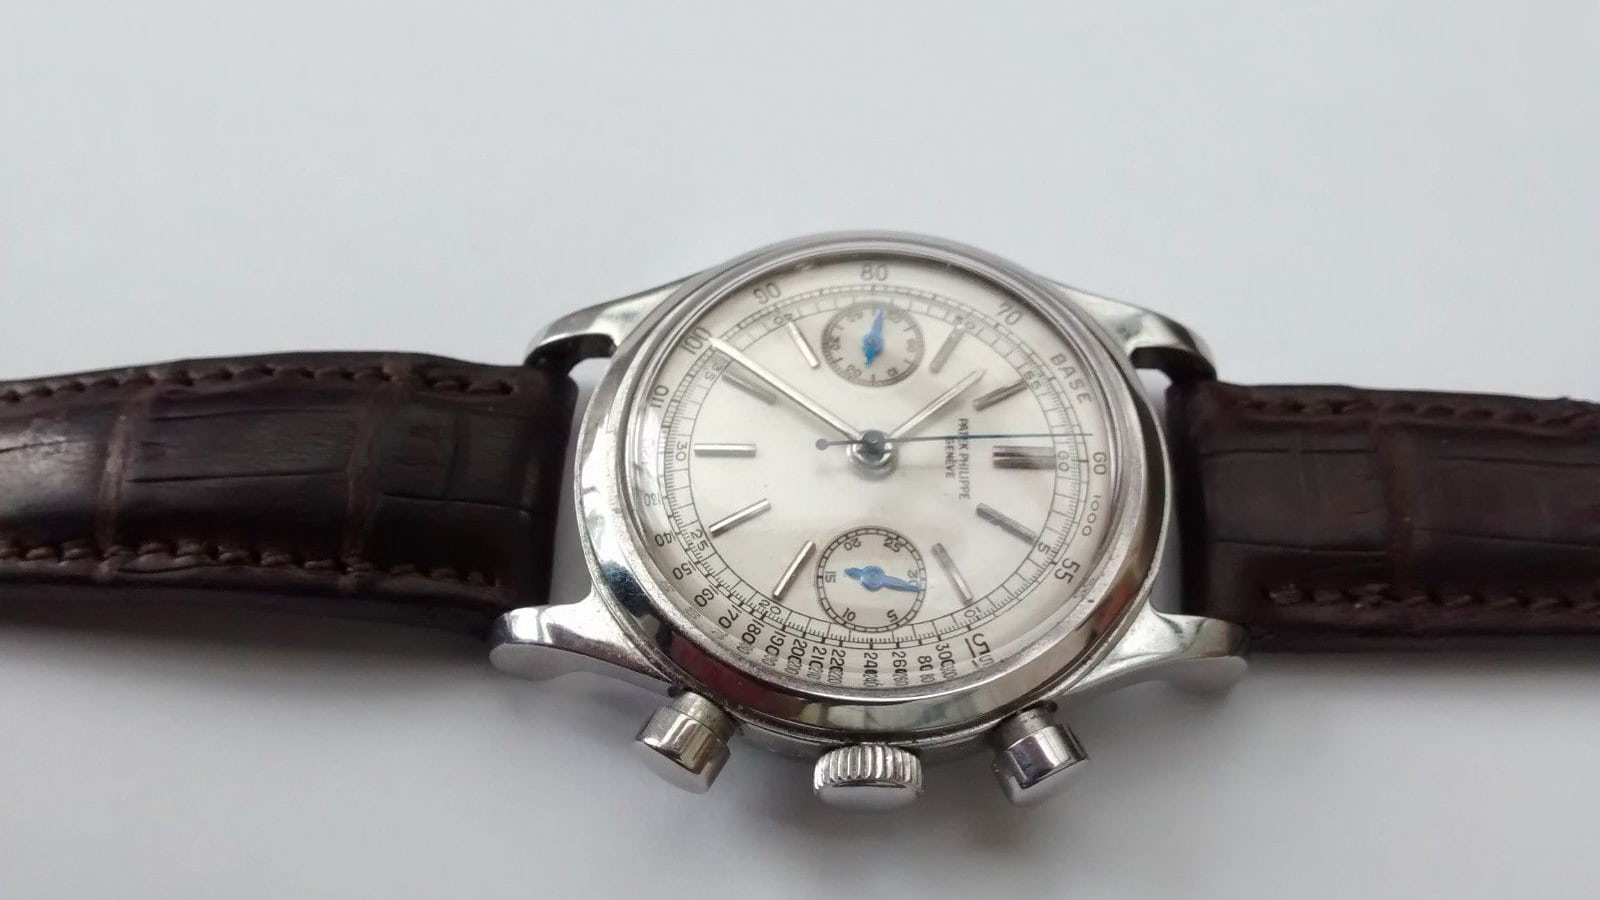 Authentication Guide: How to Tell a Real vs Fake Patek Philippe